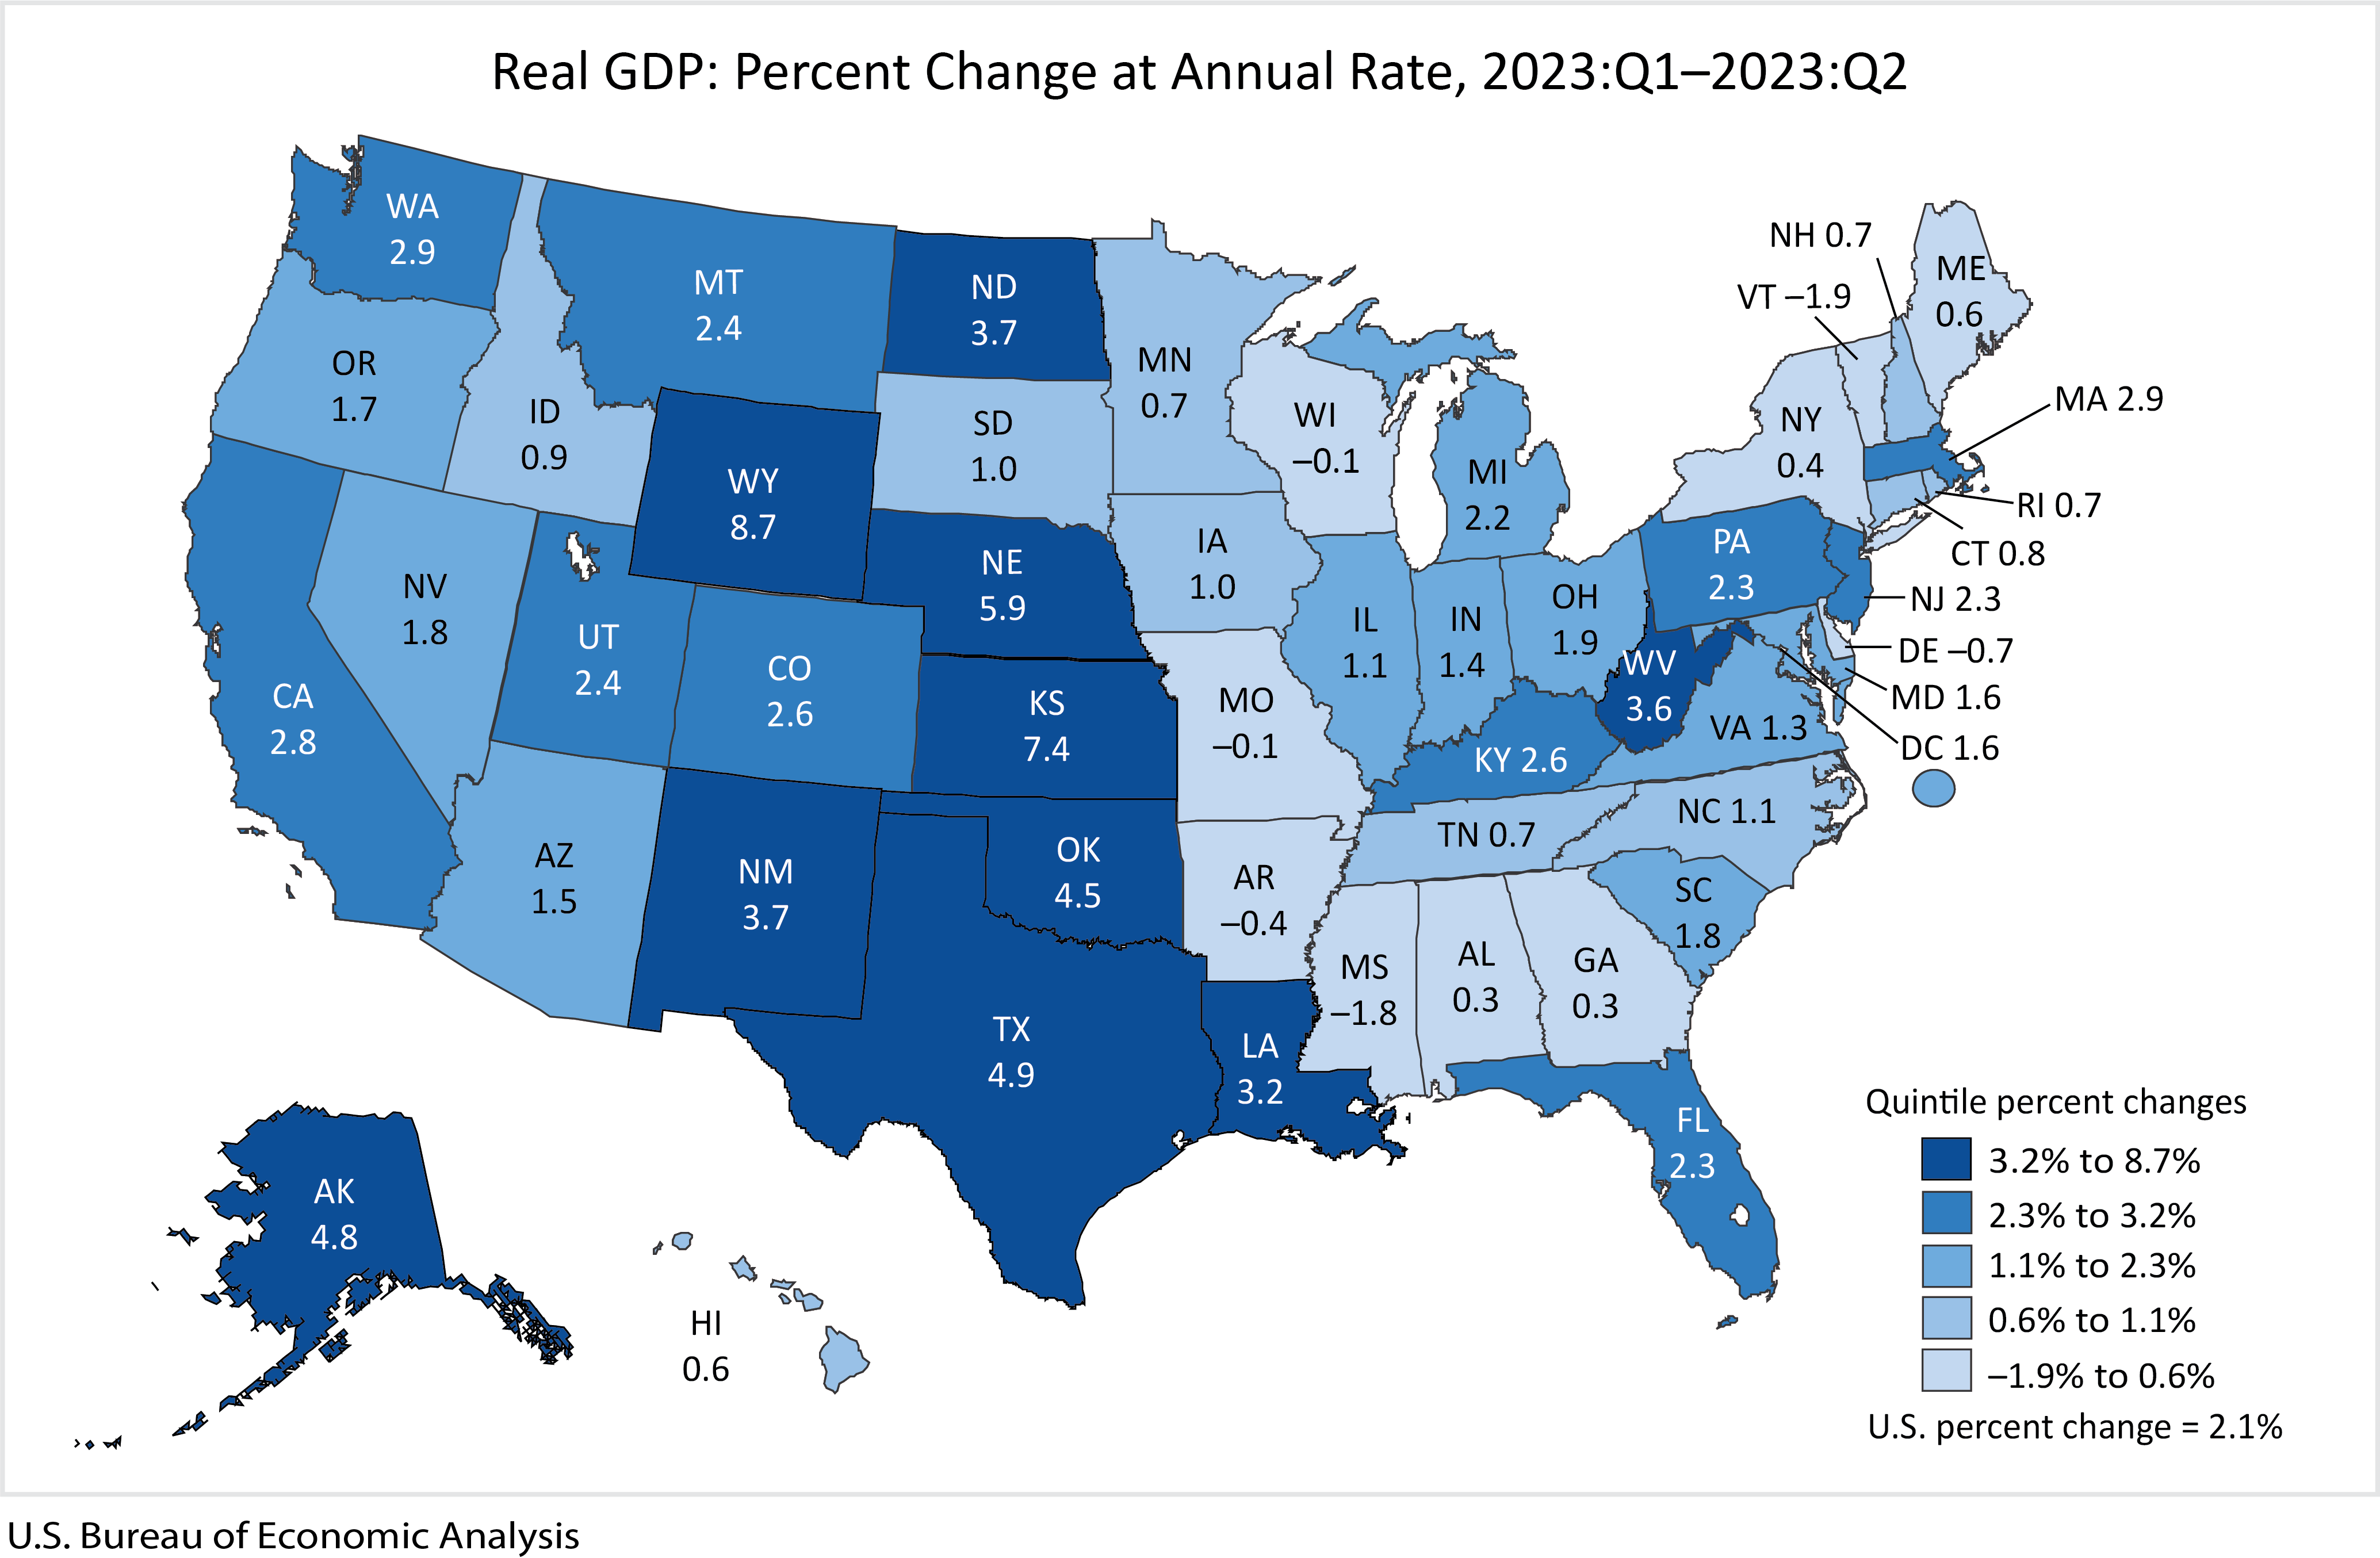 Real GDP: Percent Change at Annual Rate, 2023:Q1-2023:Q2